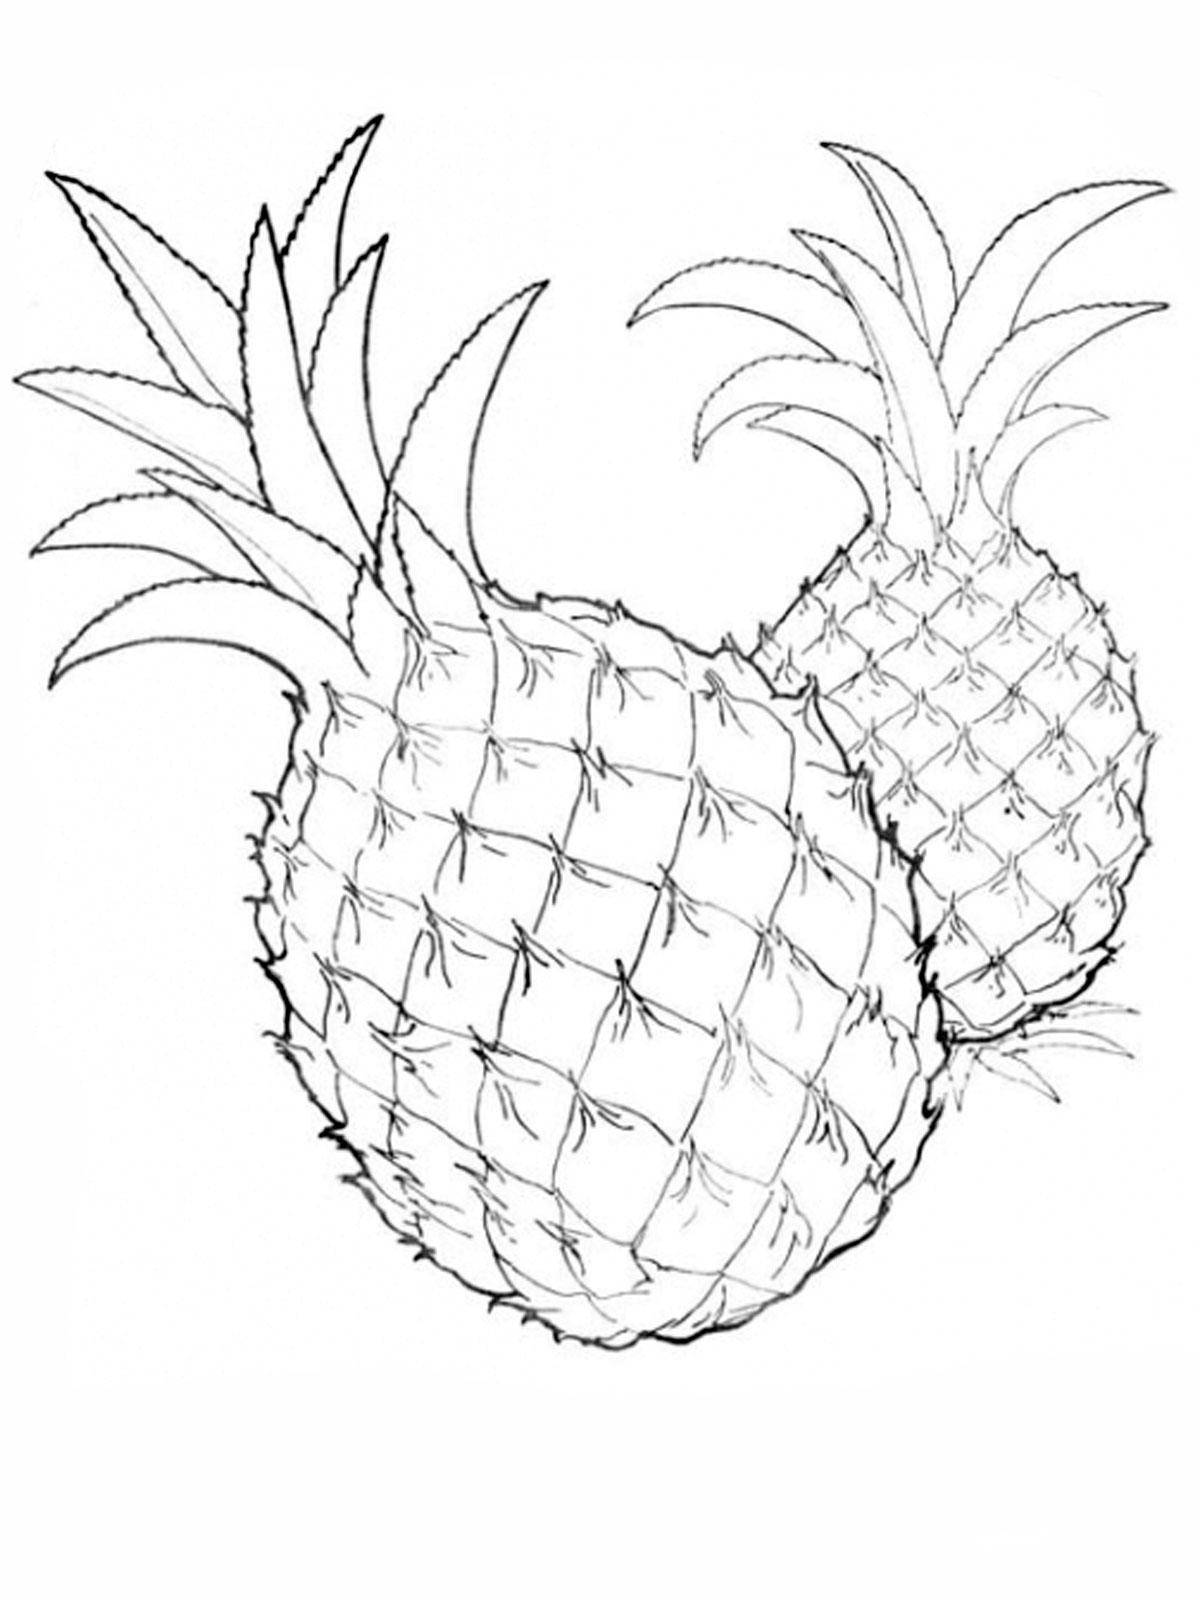 Coloring Pineapple. Category fruits. Tags:  Annan.